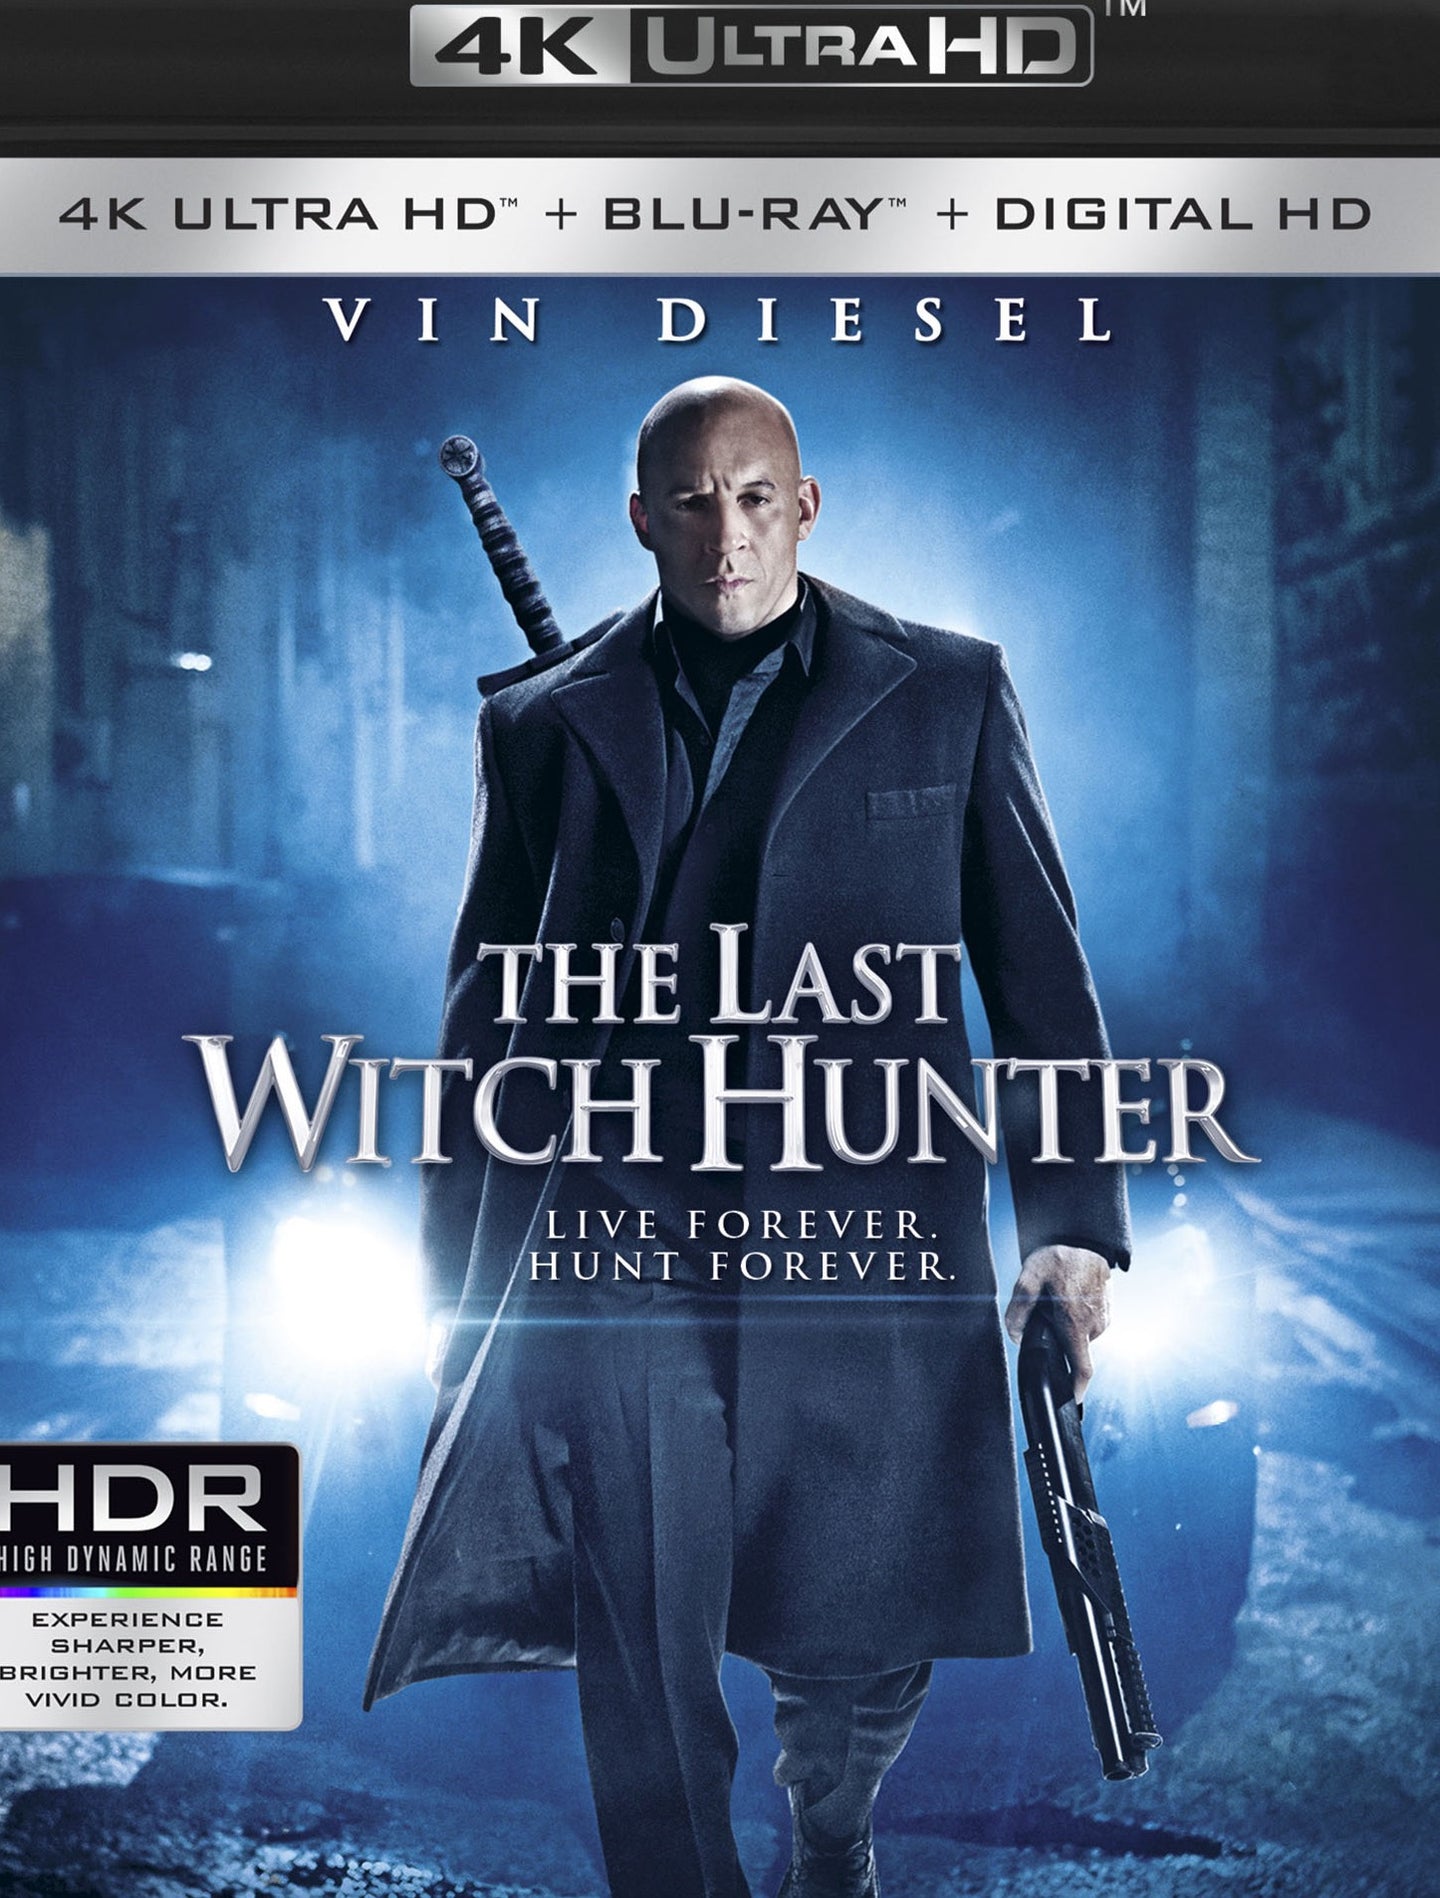 The Last Witch Hunter (2015) Vudu 4K redemption only